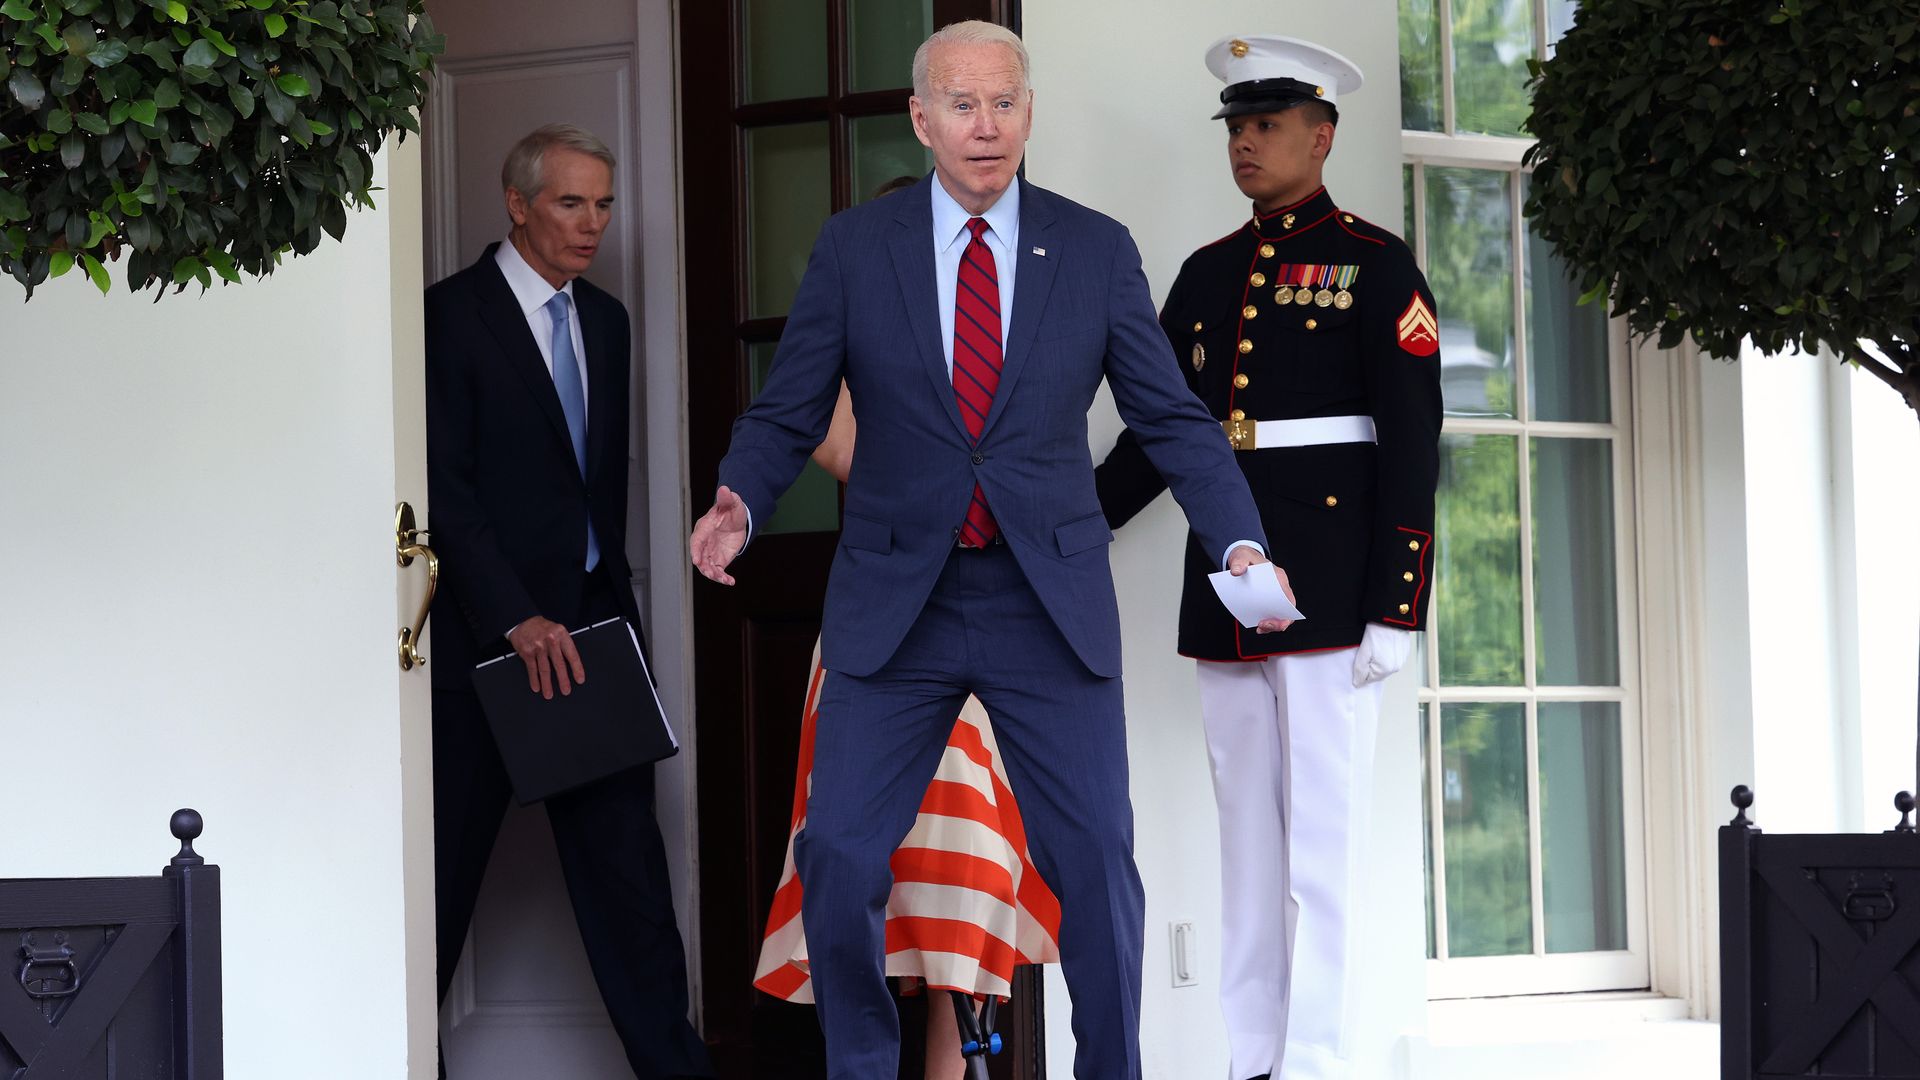 President Biden is seen surprising journalists as he shows up at the microphones outside the West Wing.